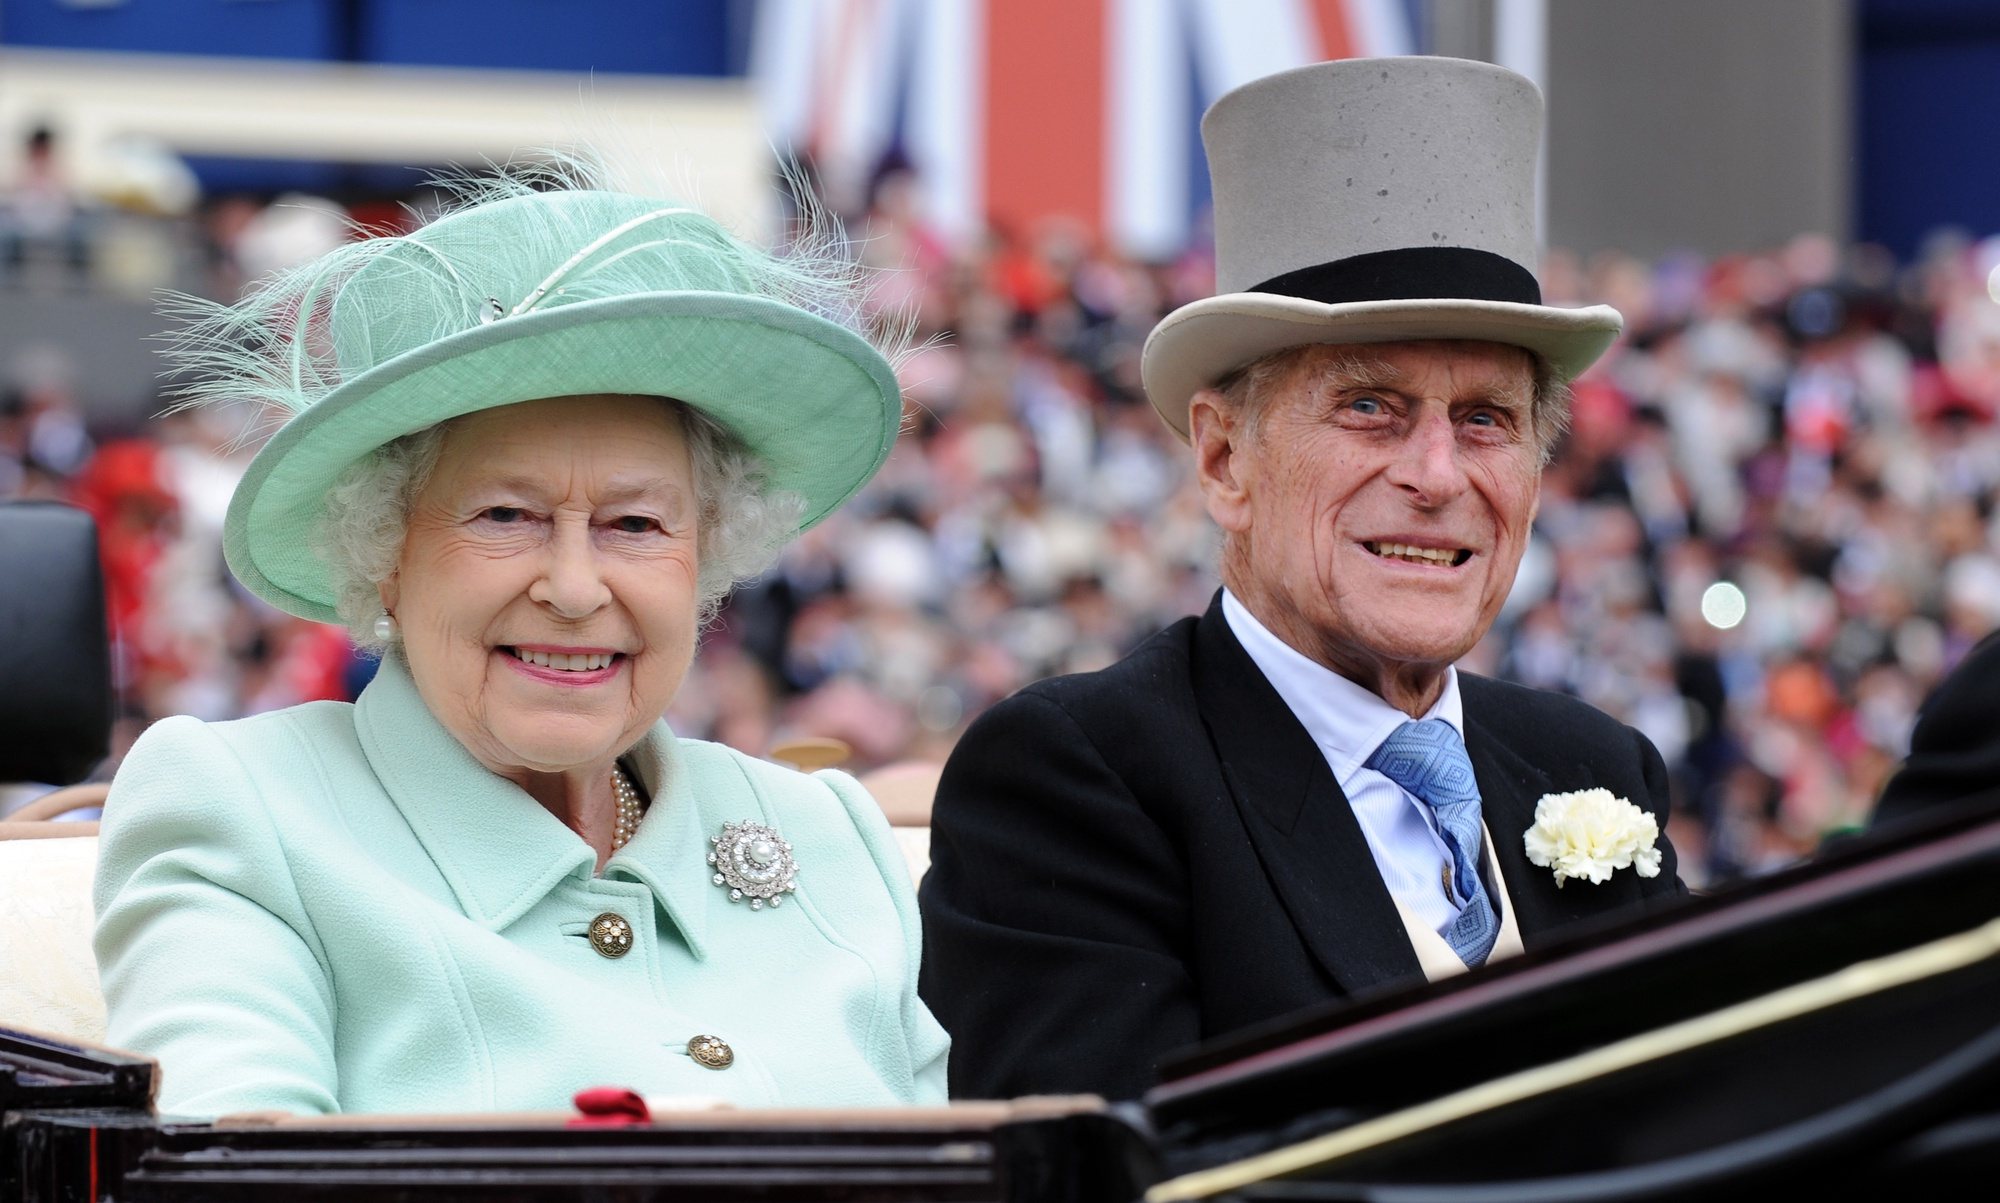 epa08474600 (FILE) - Britain&#039;s Queen Elizabeth II (L) and her husband Prince Philip, Duke of Edinburgh (R) arrive to attend Ladies Day at Royal Ascot race meeting, in Ascot, Britain, 21 June 2012  (reissued 09 June 2020). Prince Philip, Duke of Edinburgh will turn 99 on 10 June 2020. He has retired from official duties in 2017.  EPA/ANDY RAIN *** Local Caption *** 52188758